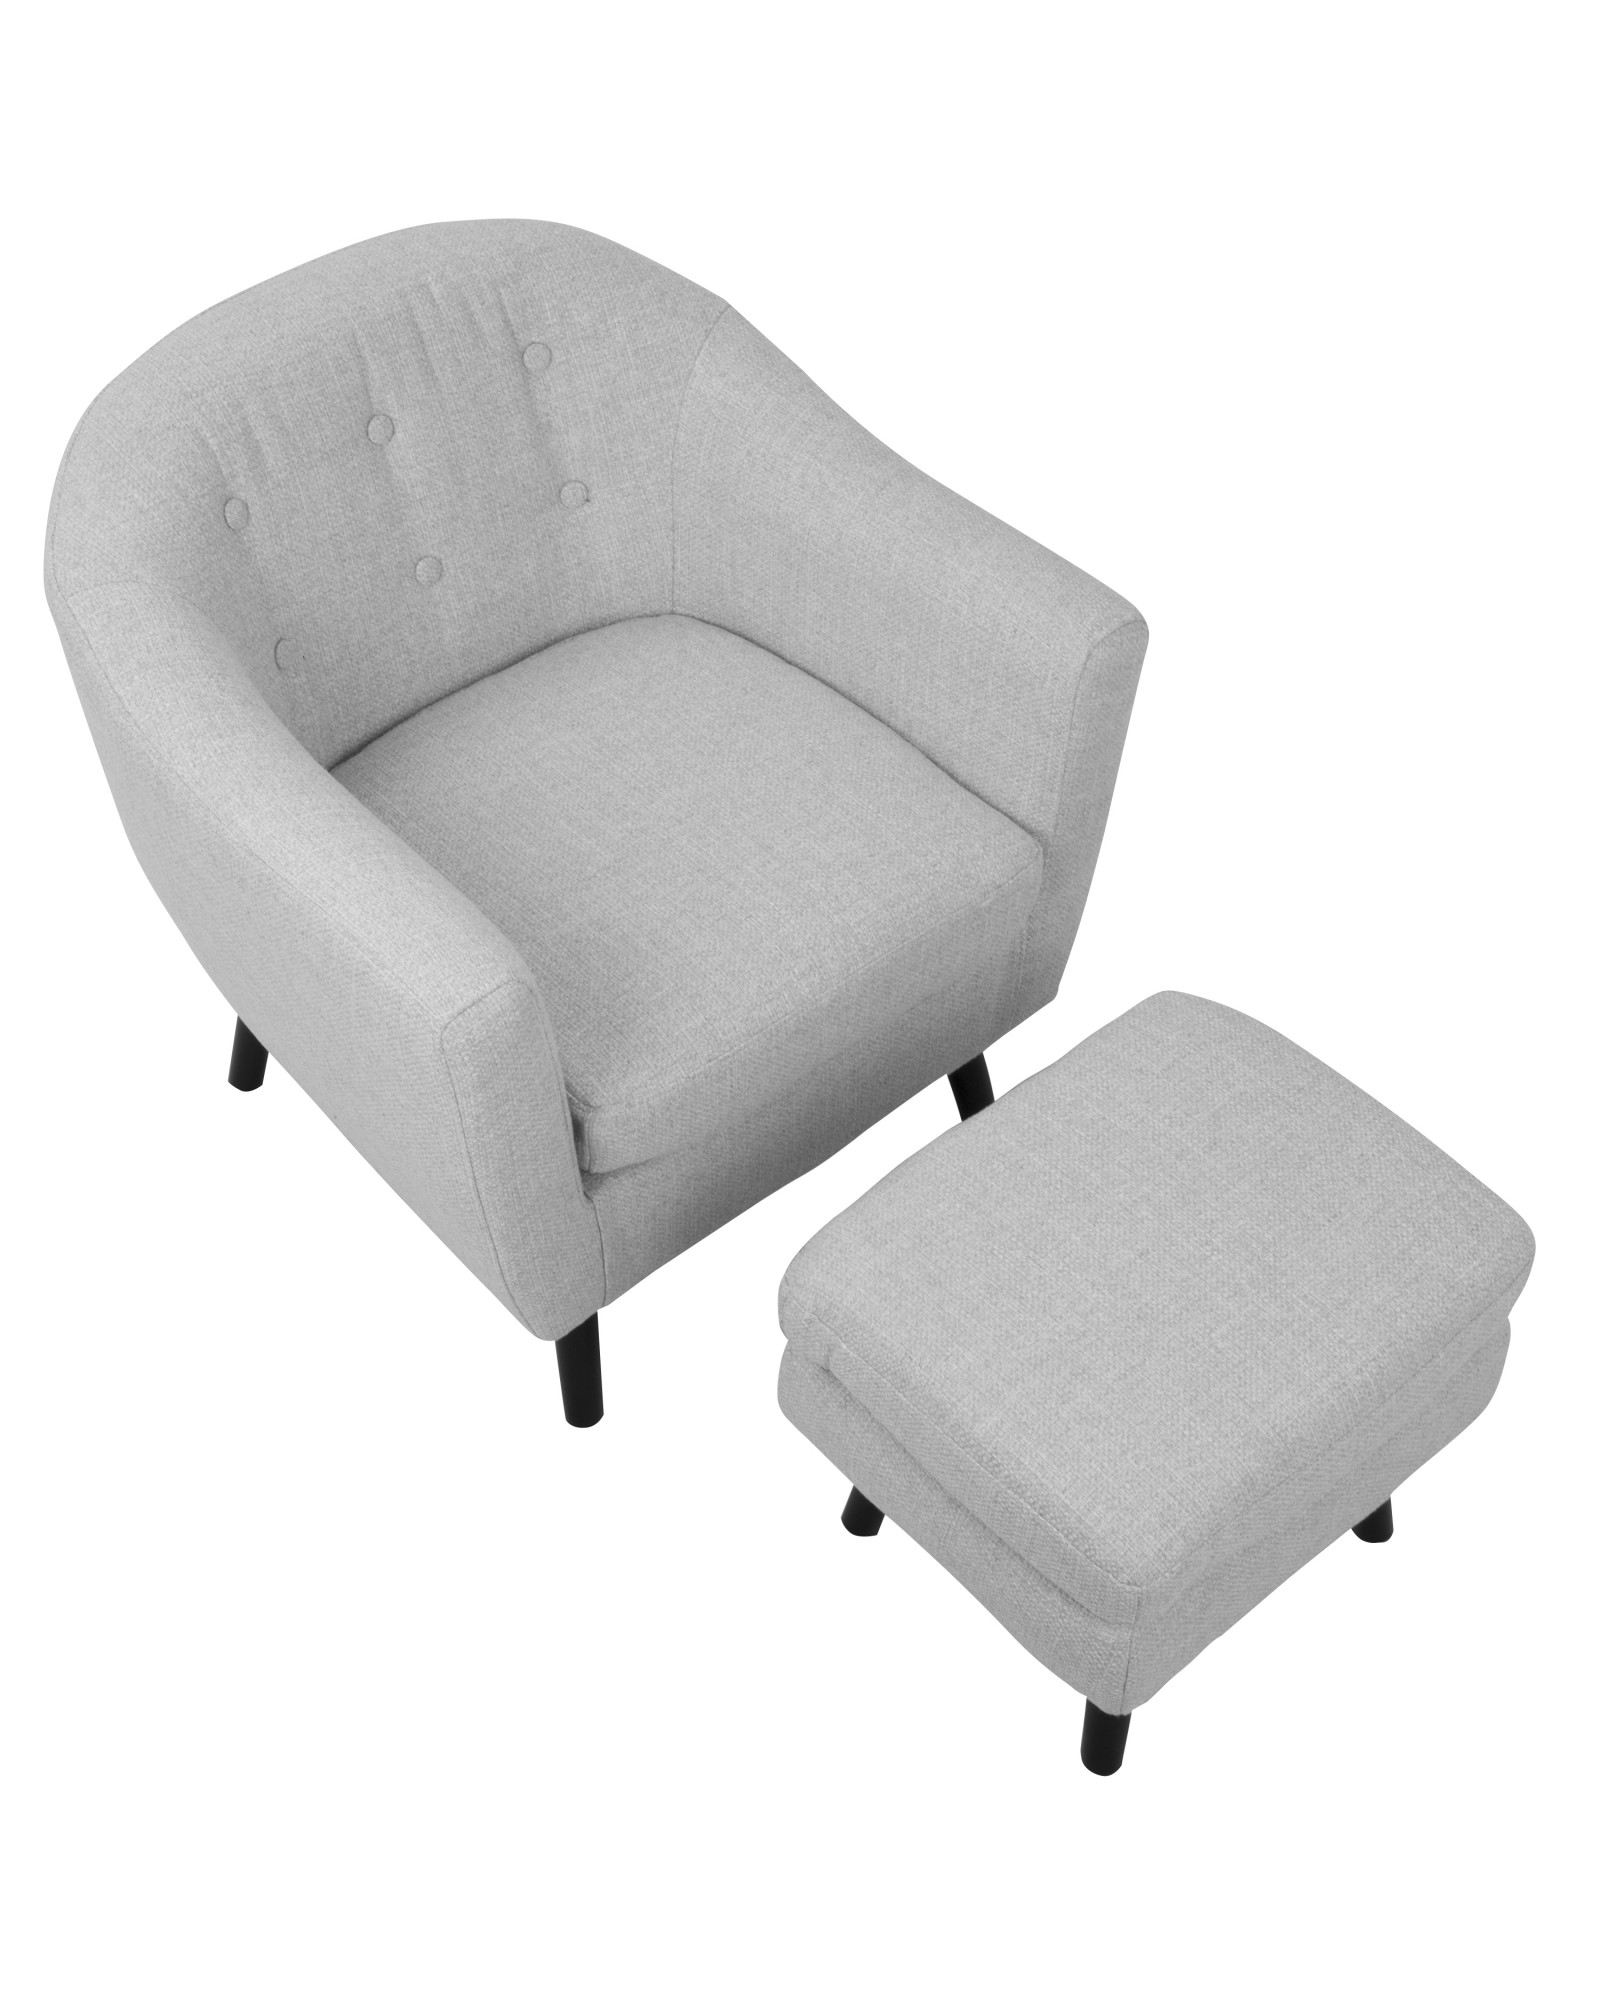 Rockwell Mid-Century Modern Accent Chair and Ottoman in Light Grey Noise Fabric